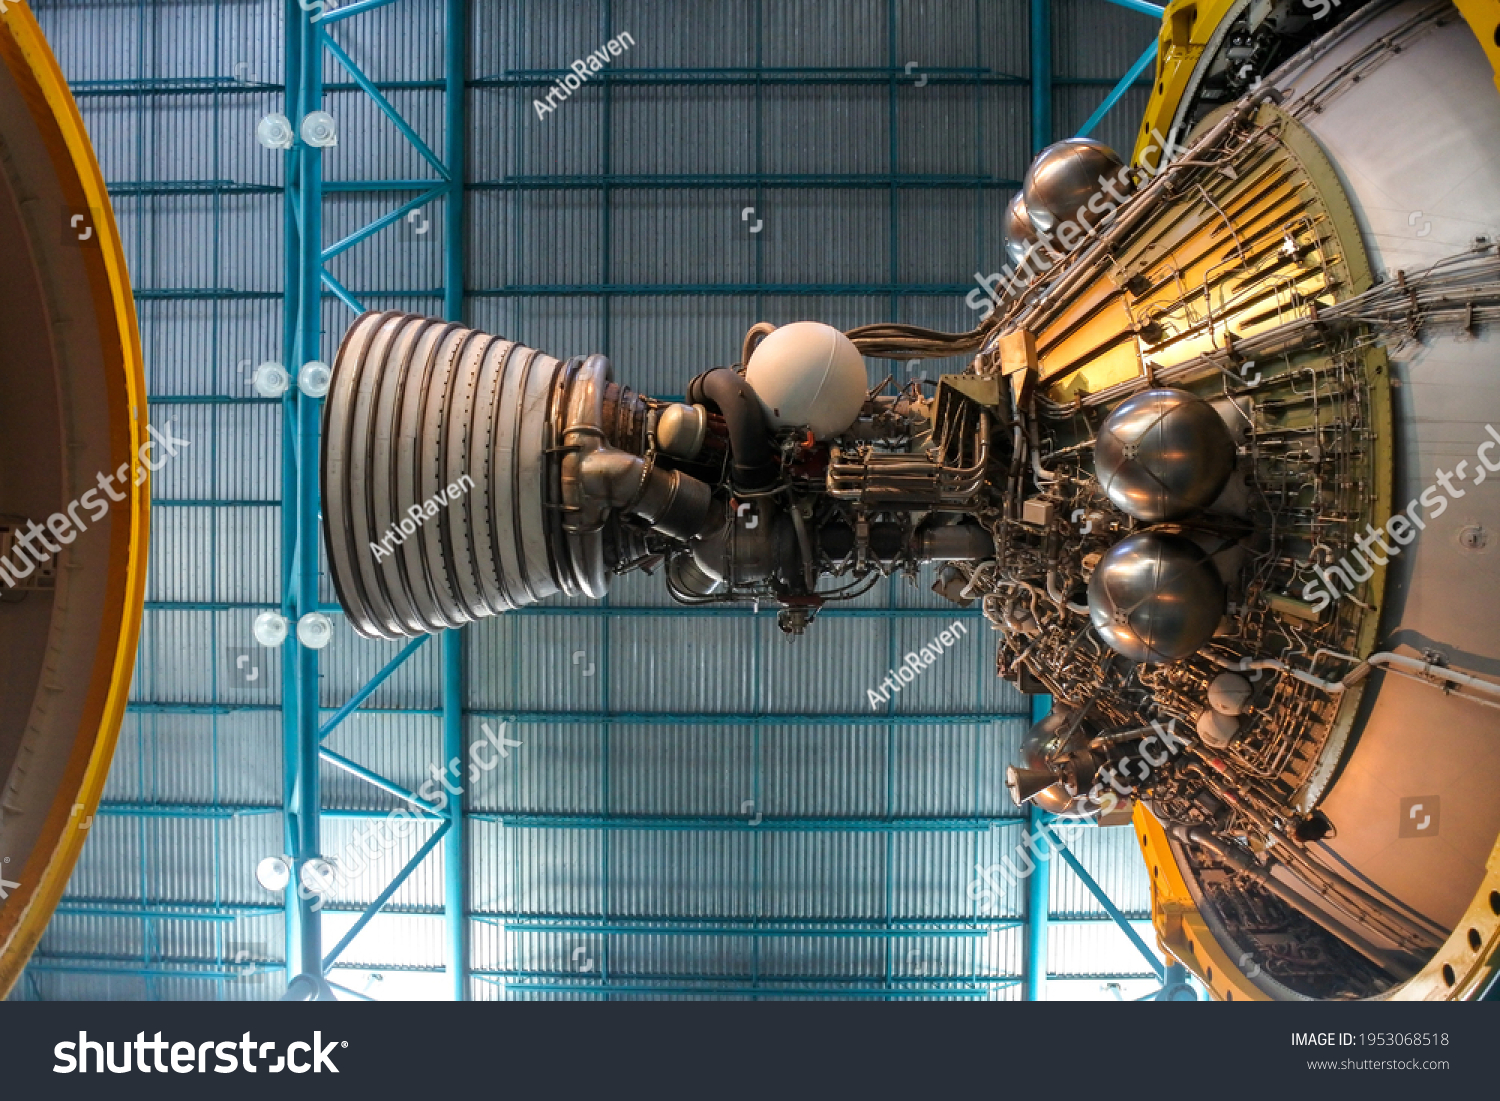 Exhaust pipes of space rocket with lots of wires and metal parts for space exploration #1953068518